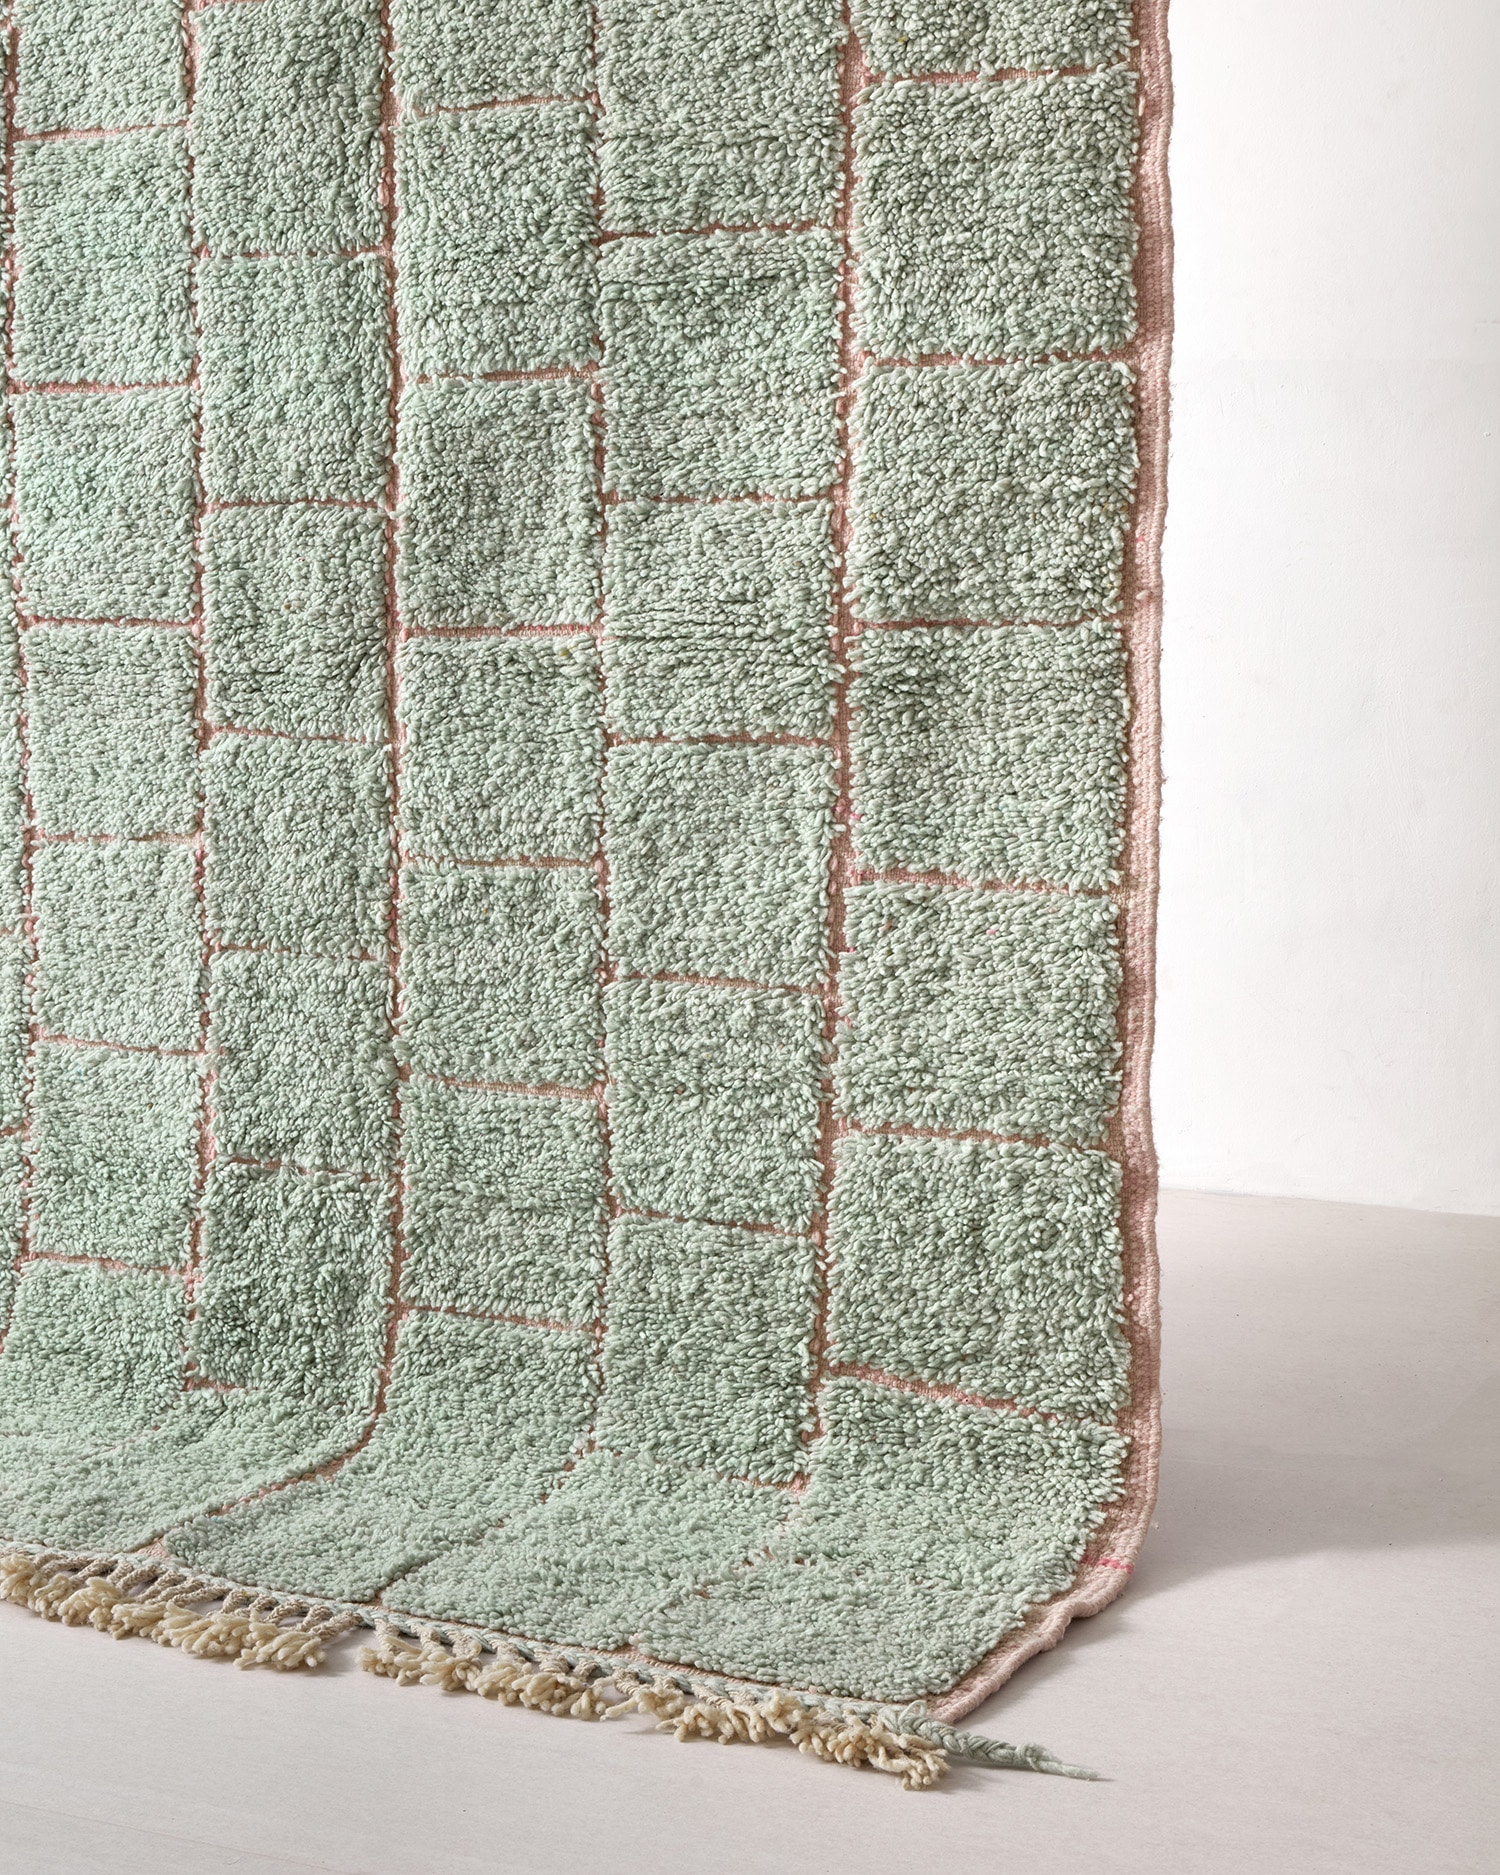 Mint-coloured rug with pink flatwoven pattern